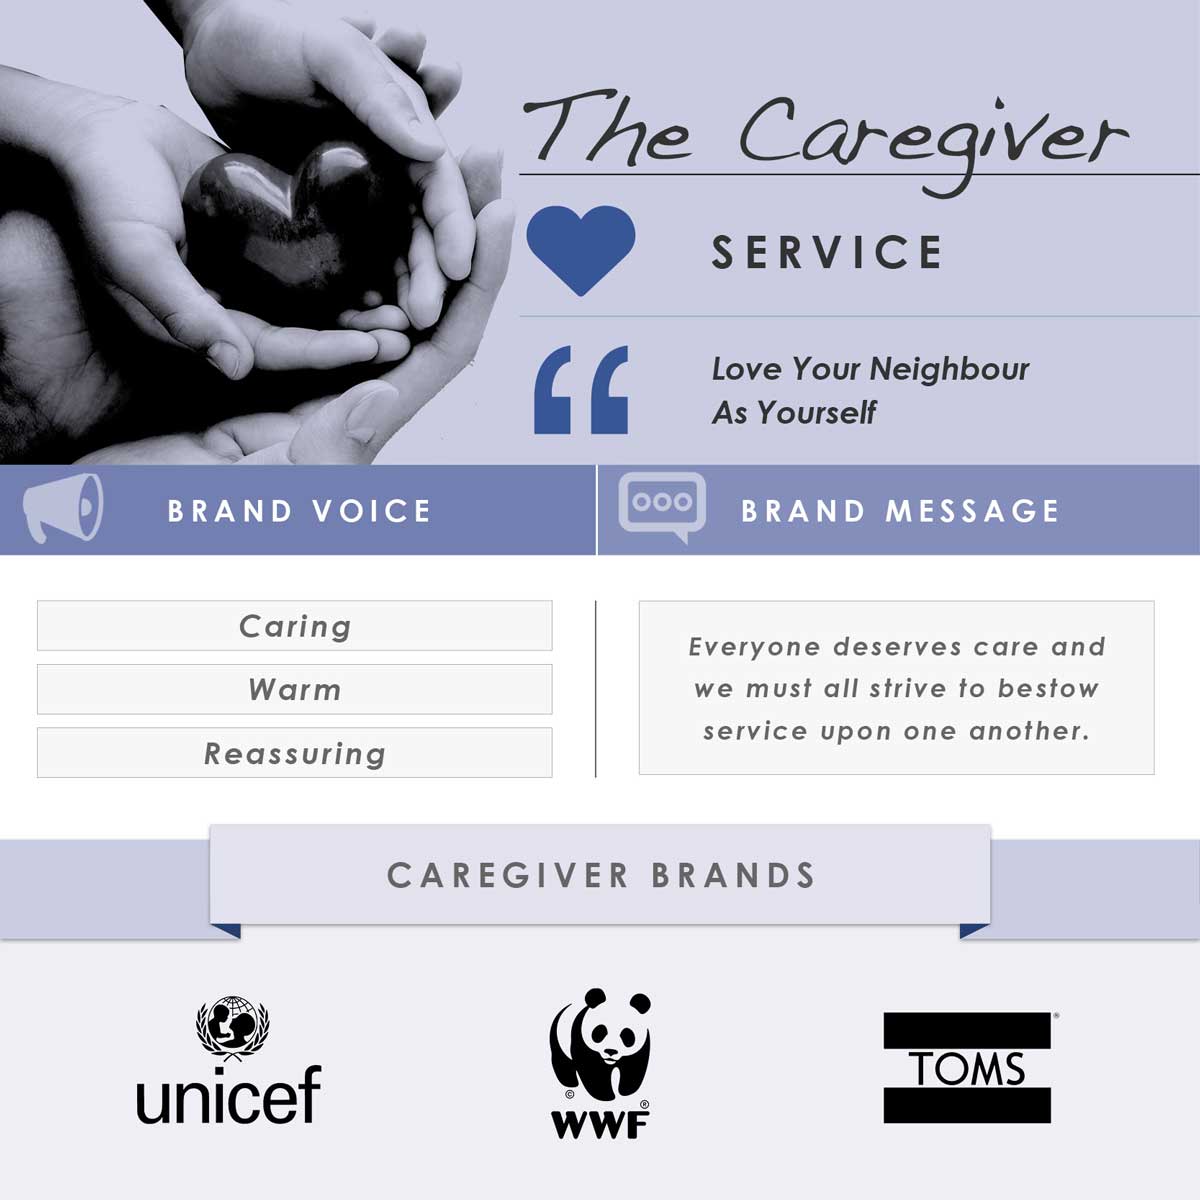 The Caregiver Atchetypes